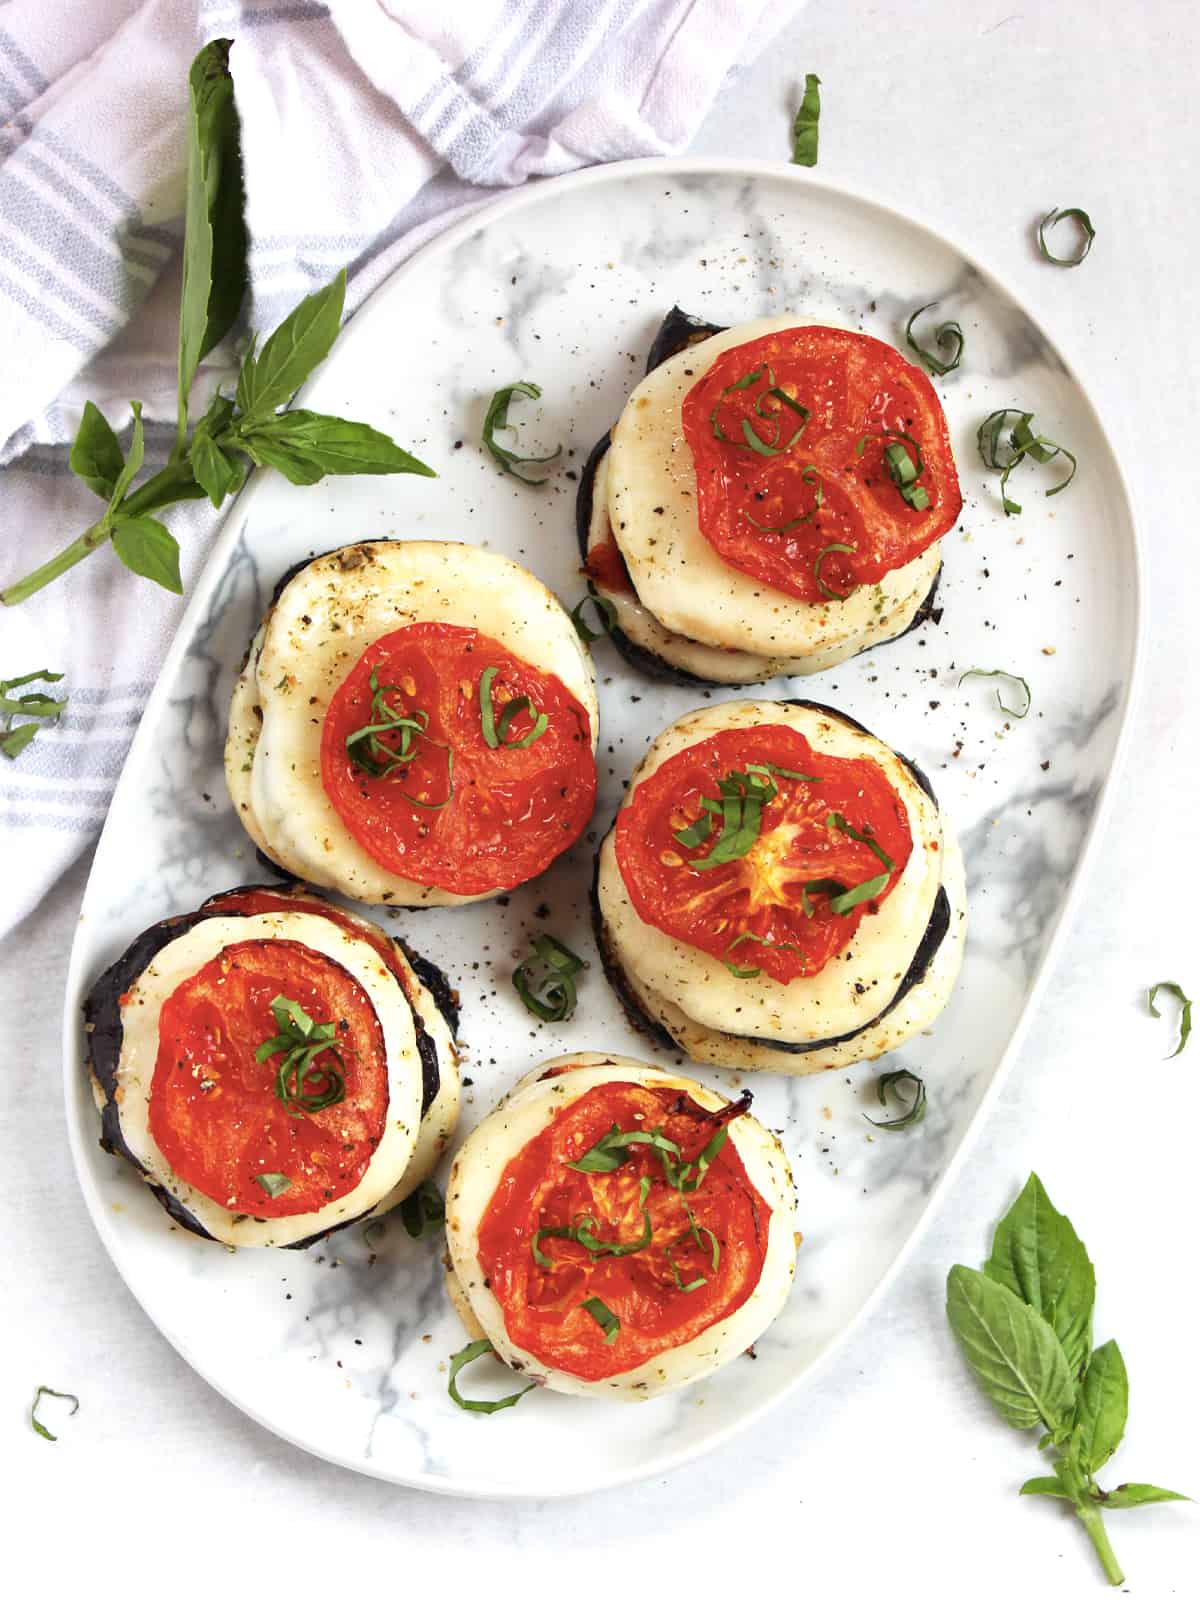 Five eggplant mozzarella stacks topped with sliced roasted tomatoes.